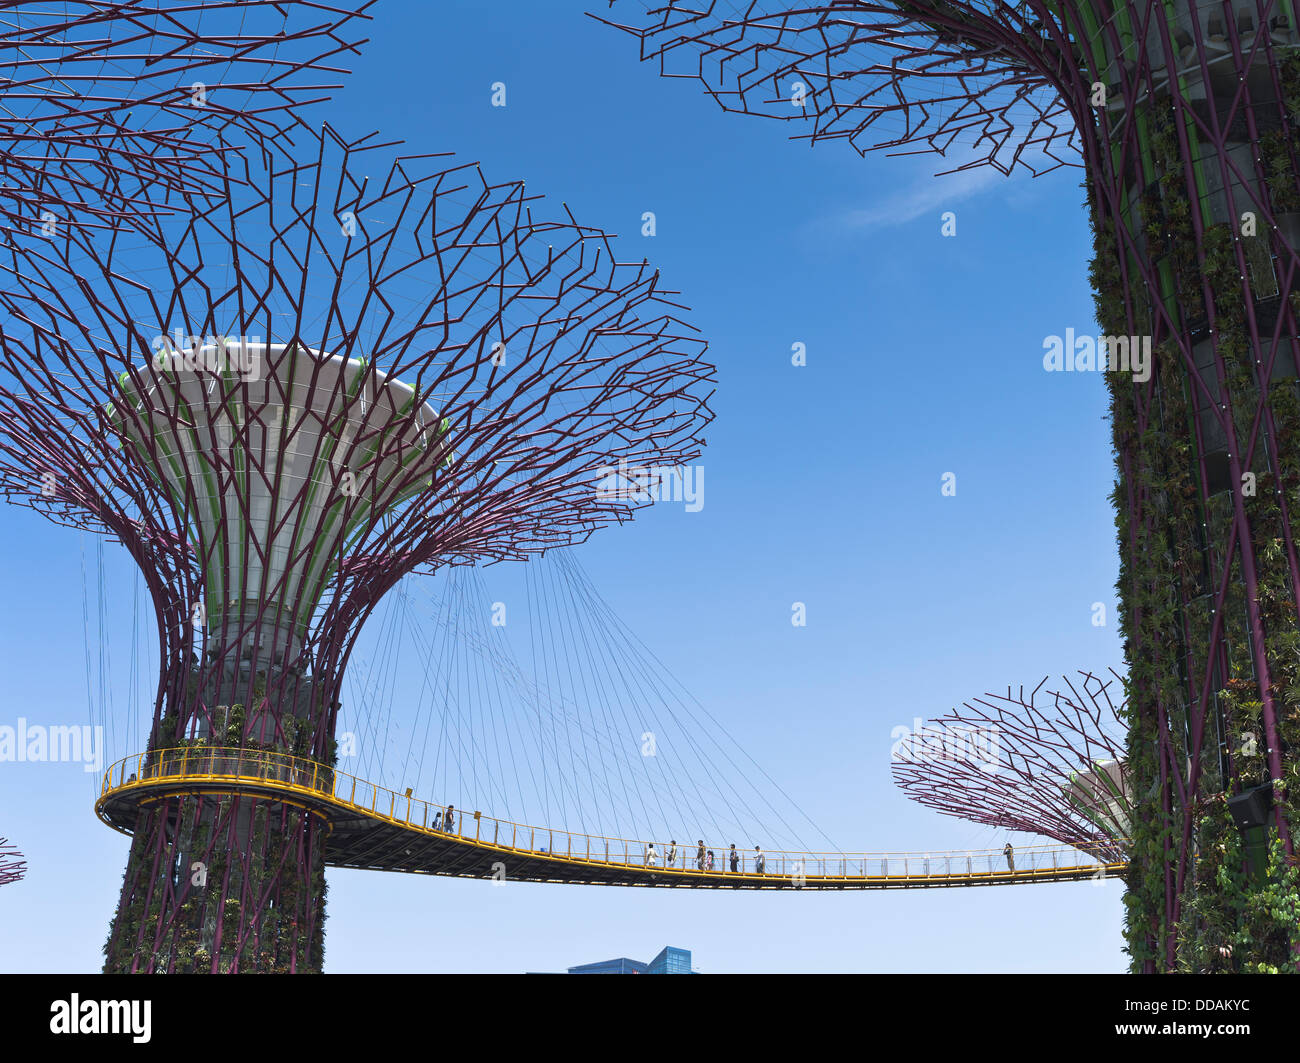 dh Supertree Grove garden GARDENS BY THE BAY SINGAPORE Supertrees vertical gardens walkway people viewpoint elevated skyway trees Stock Photo